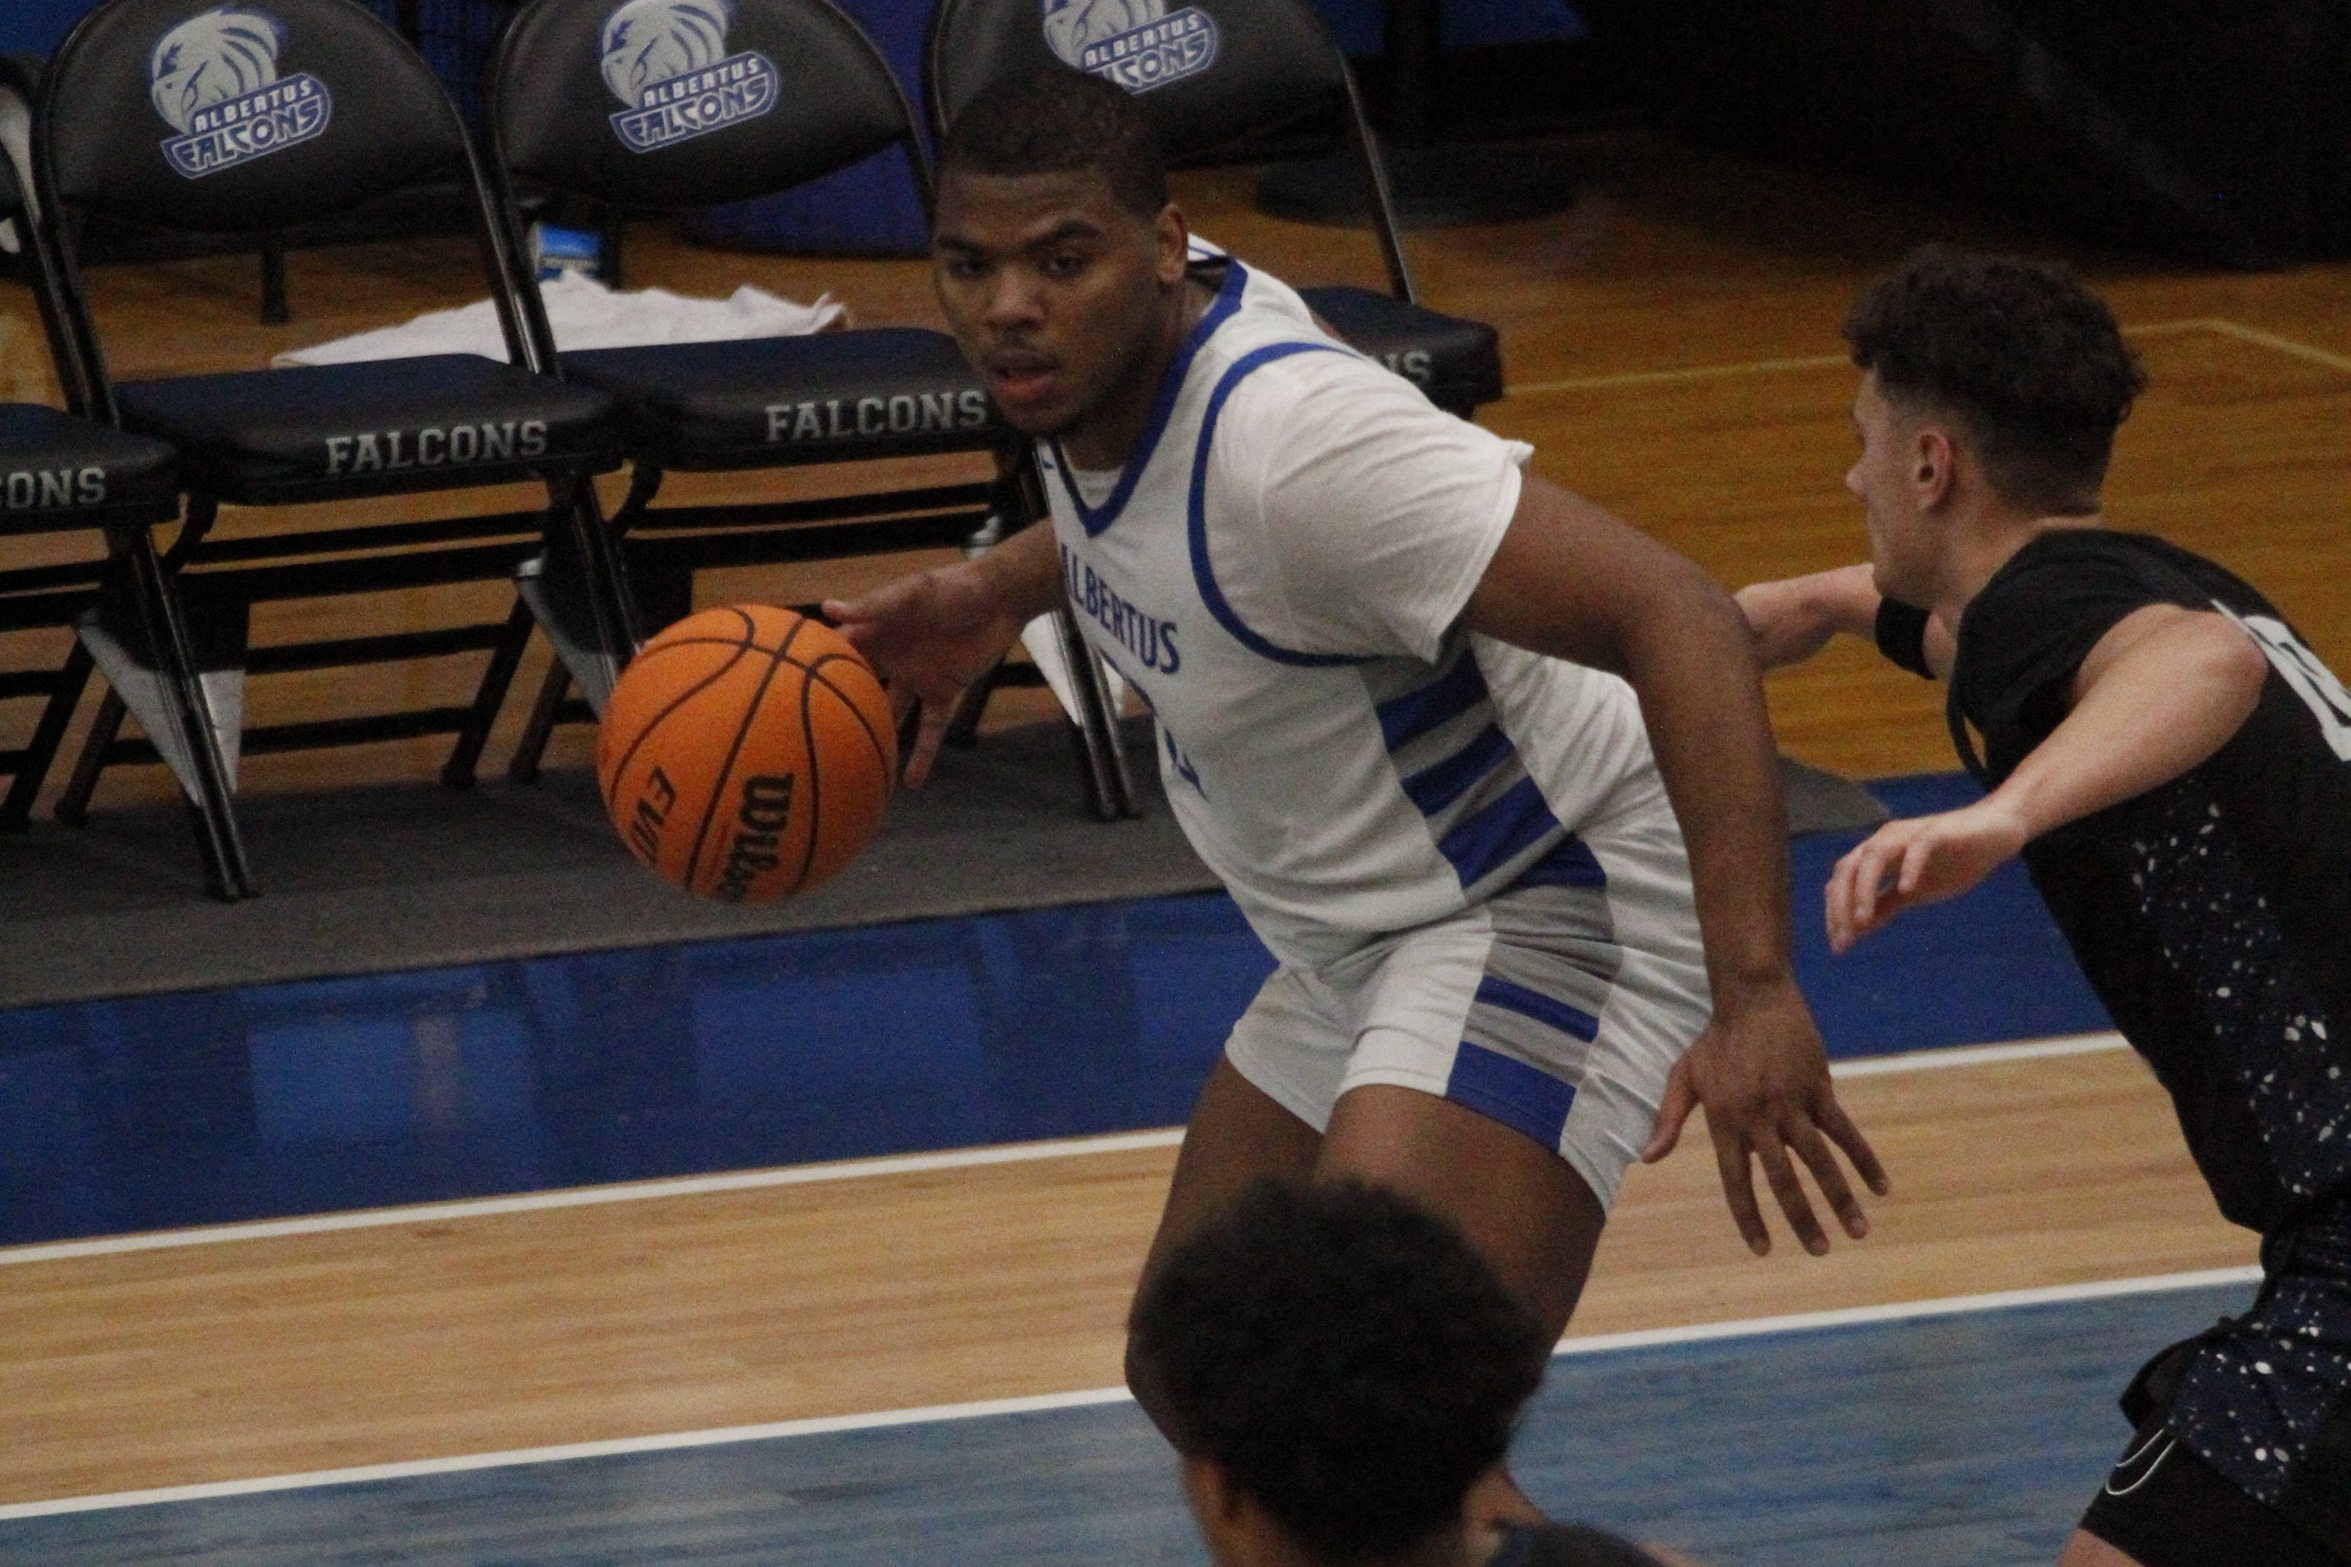 Men's Basketball Defeats Rivier For Sixth Straight Win After Huge First Half Run